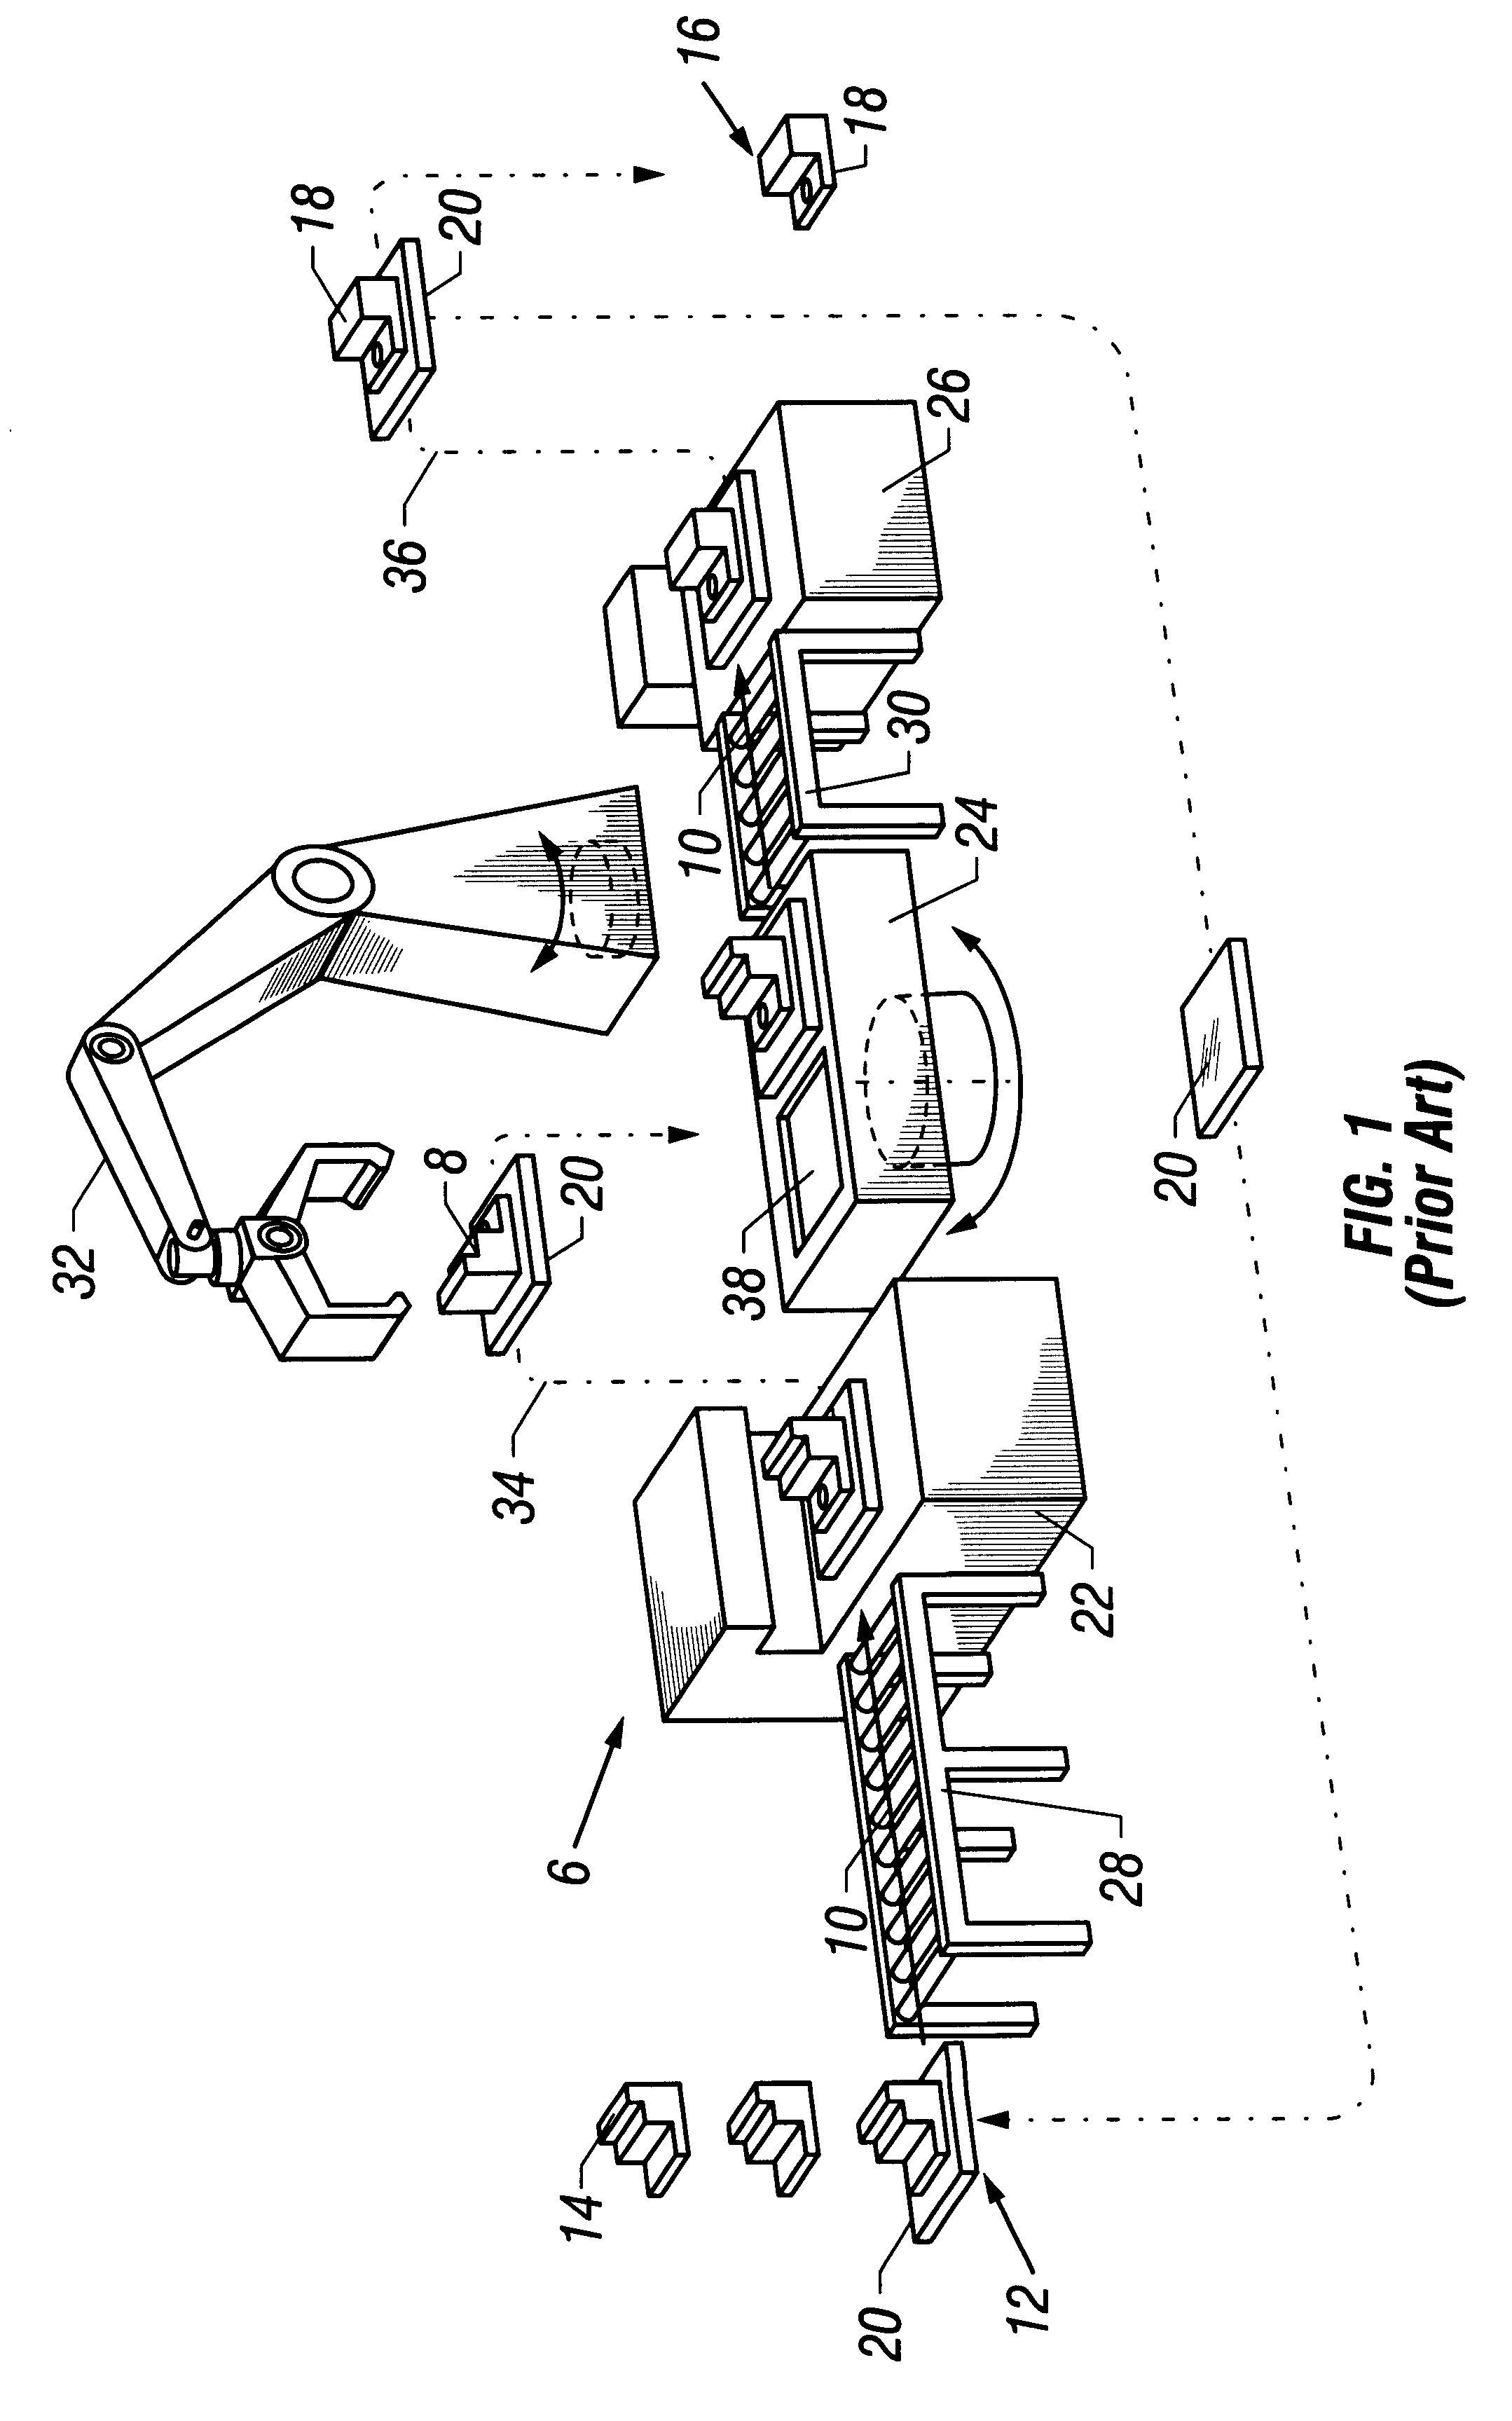 Method and apparatus for testing and controlling a flexible manufacturing system